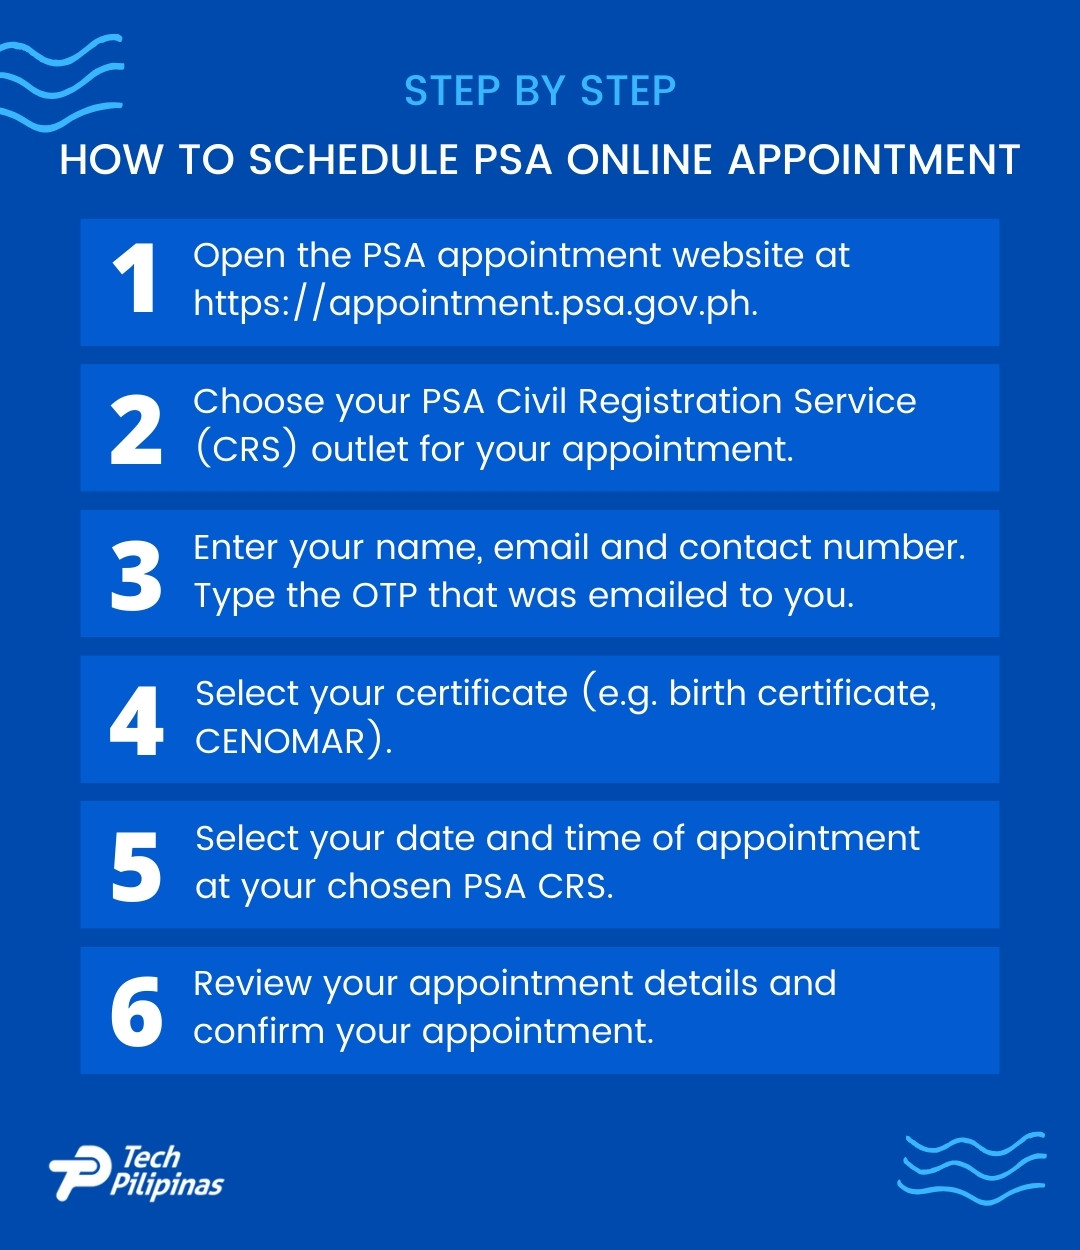 PSA online appointment step-by-step guide